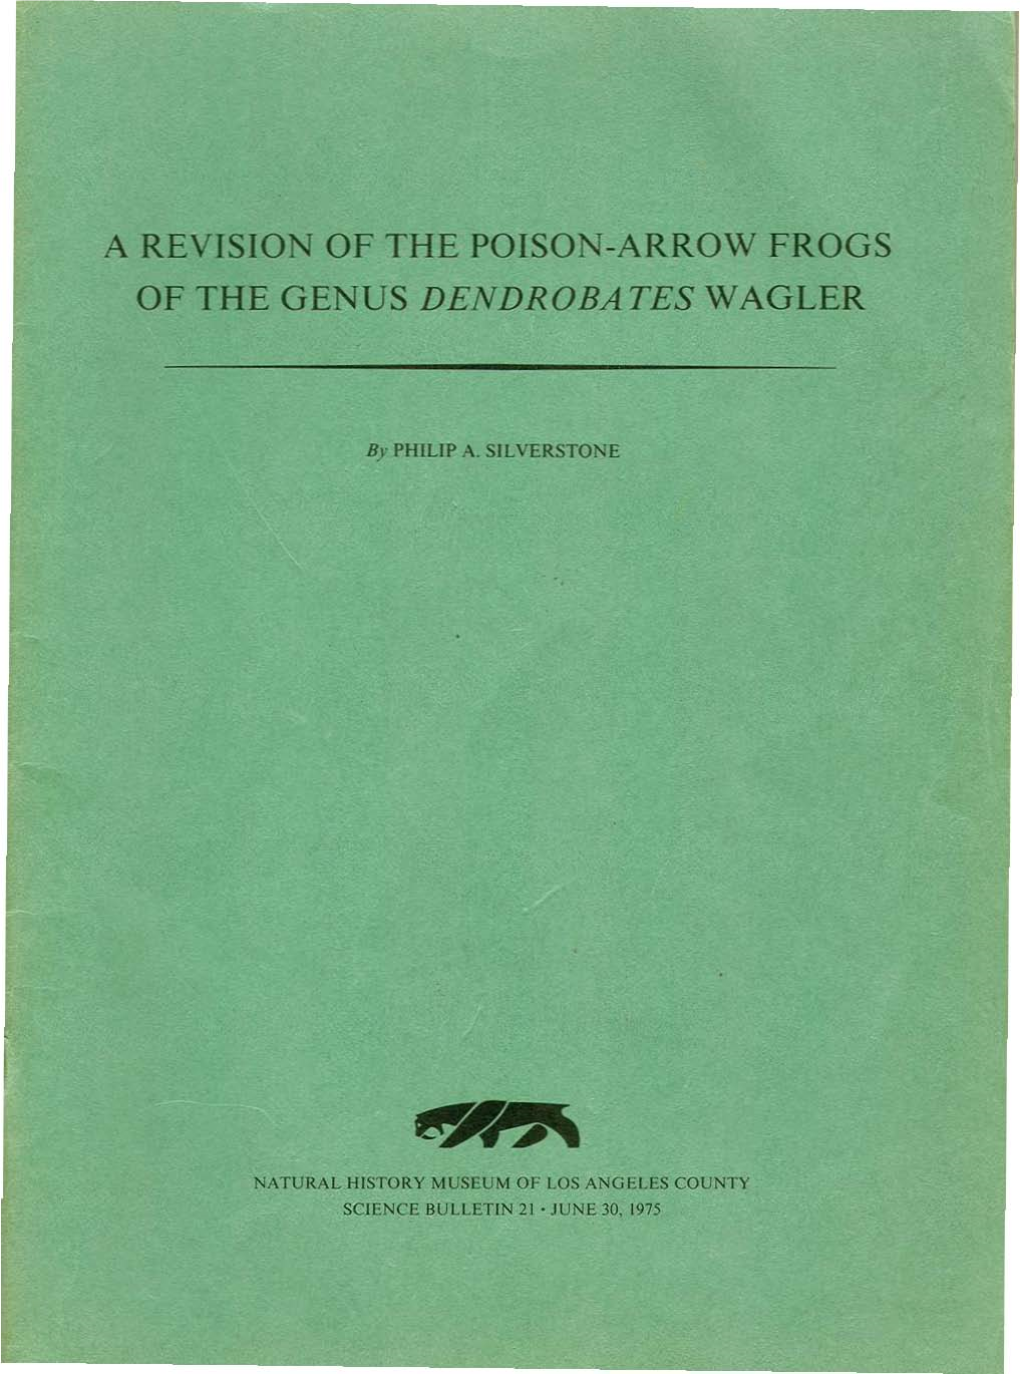 A Revision of the Poison-Arrow Frogs of the Genus Dendrobates Wagler